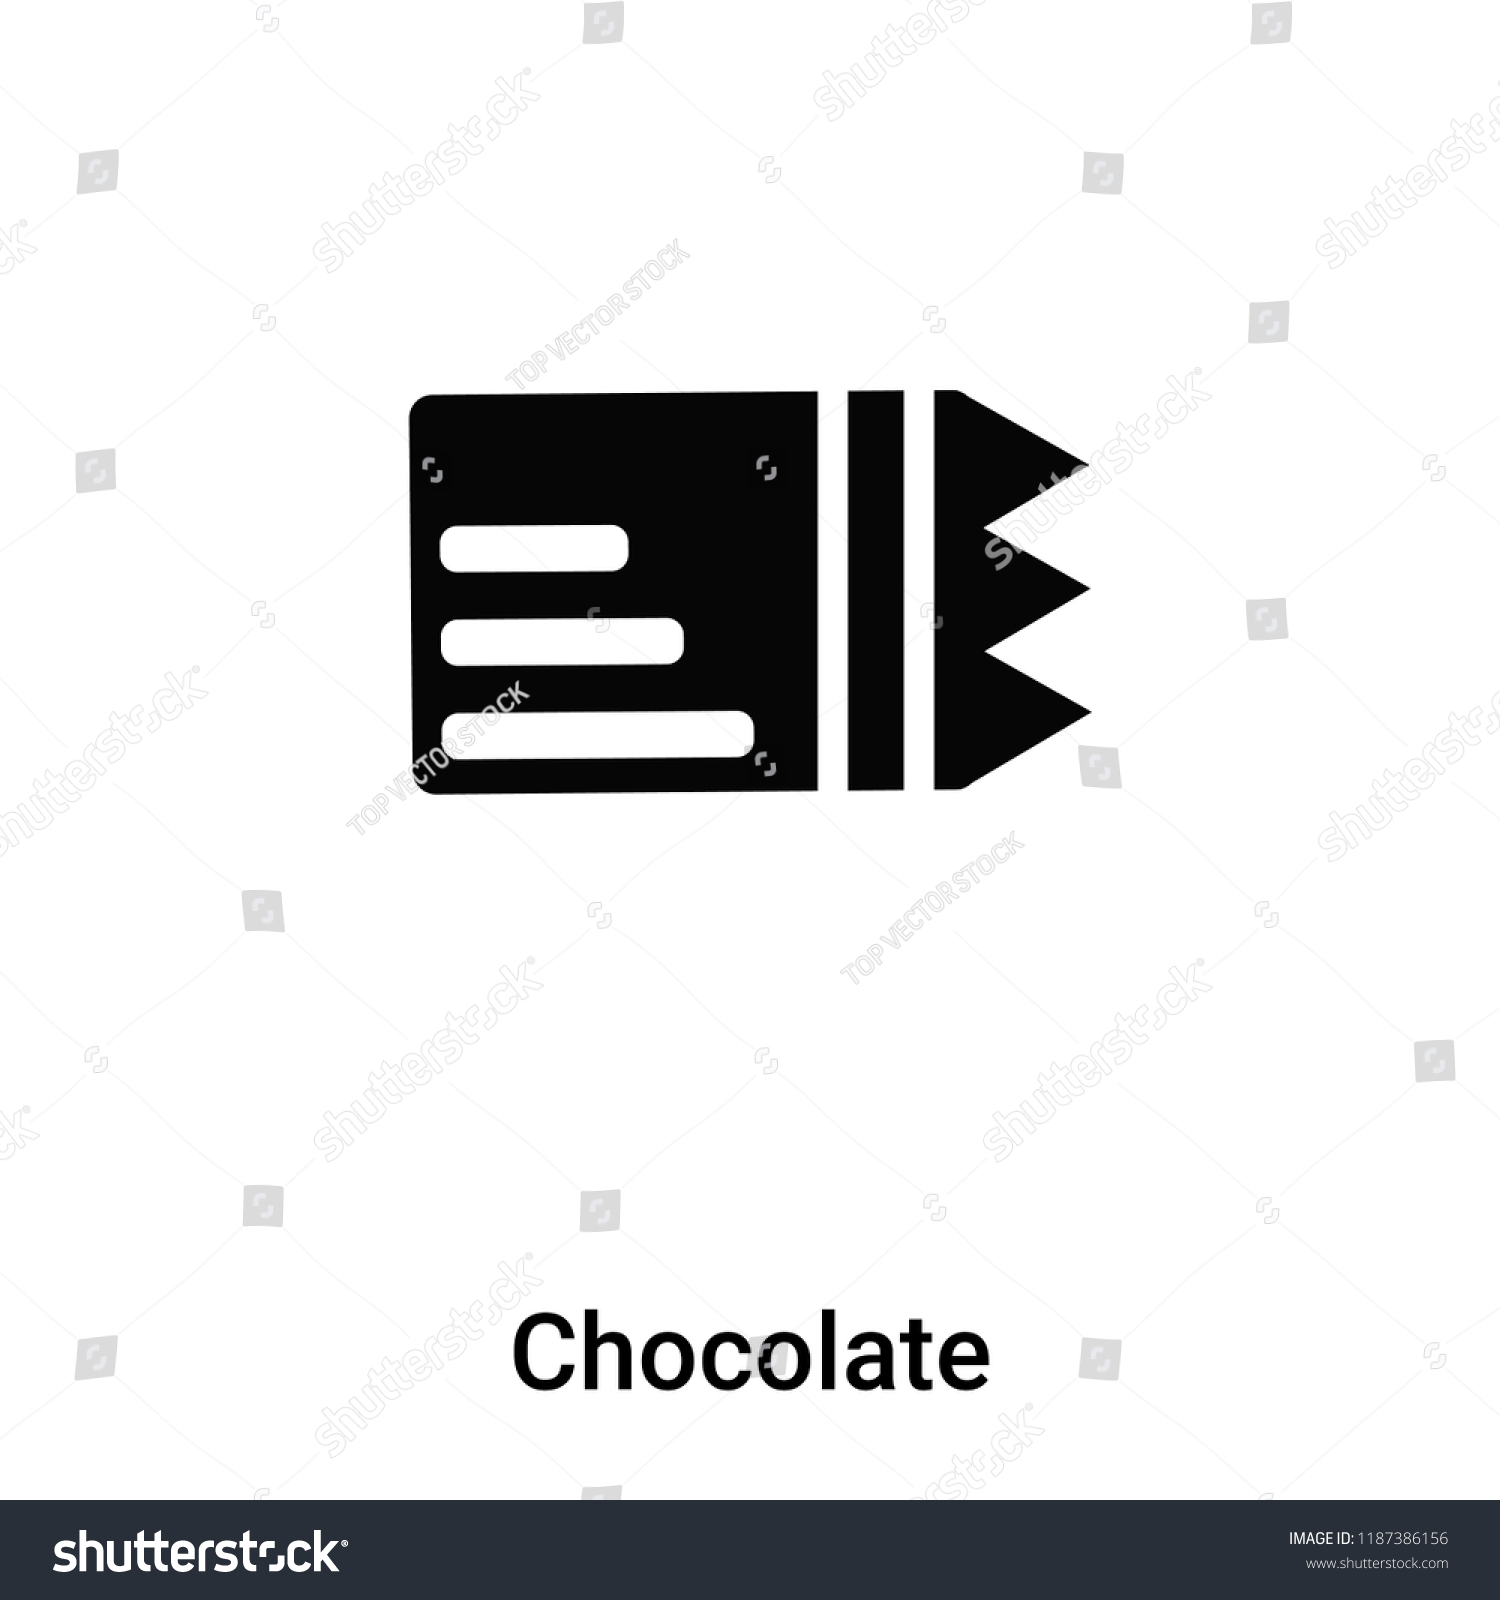 SVG of Chocolate icon vector isolated on white background, logo concept of Chocolate sign on transparent background, filled black symbol svg